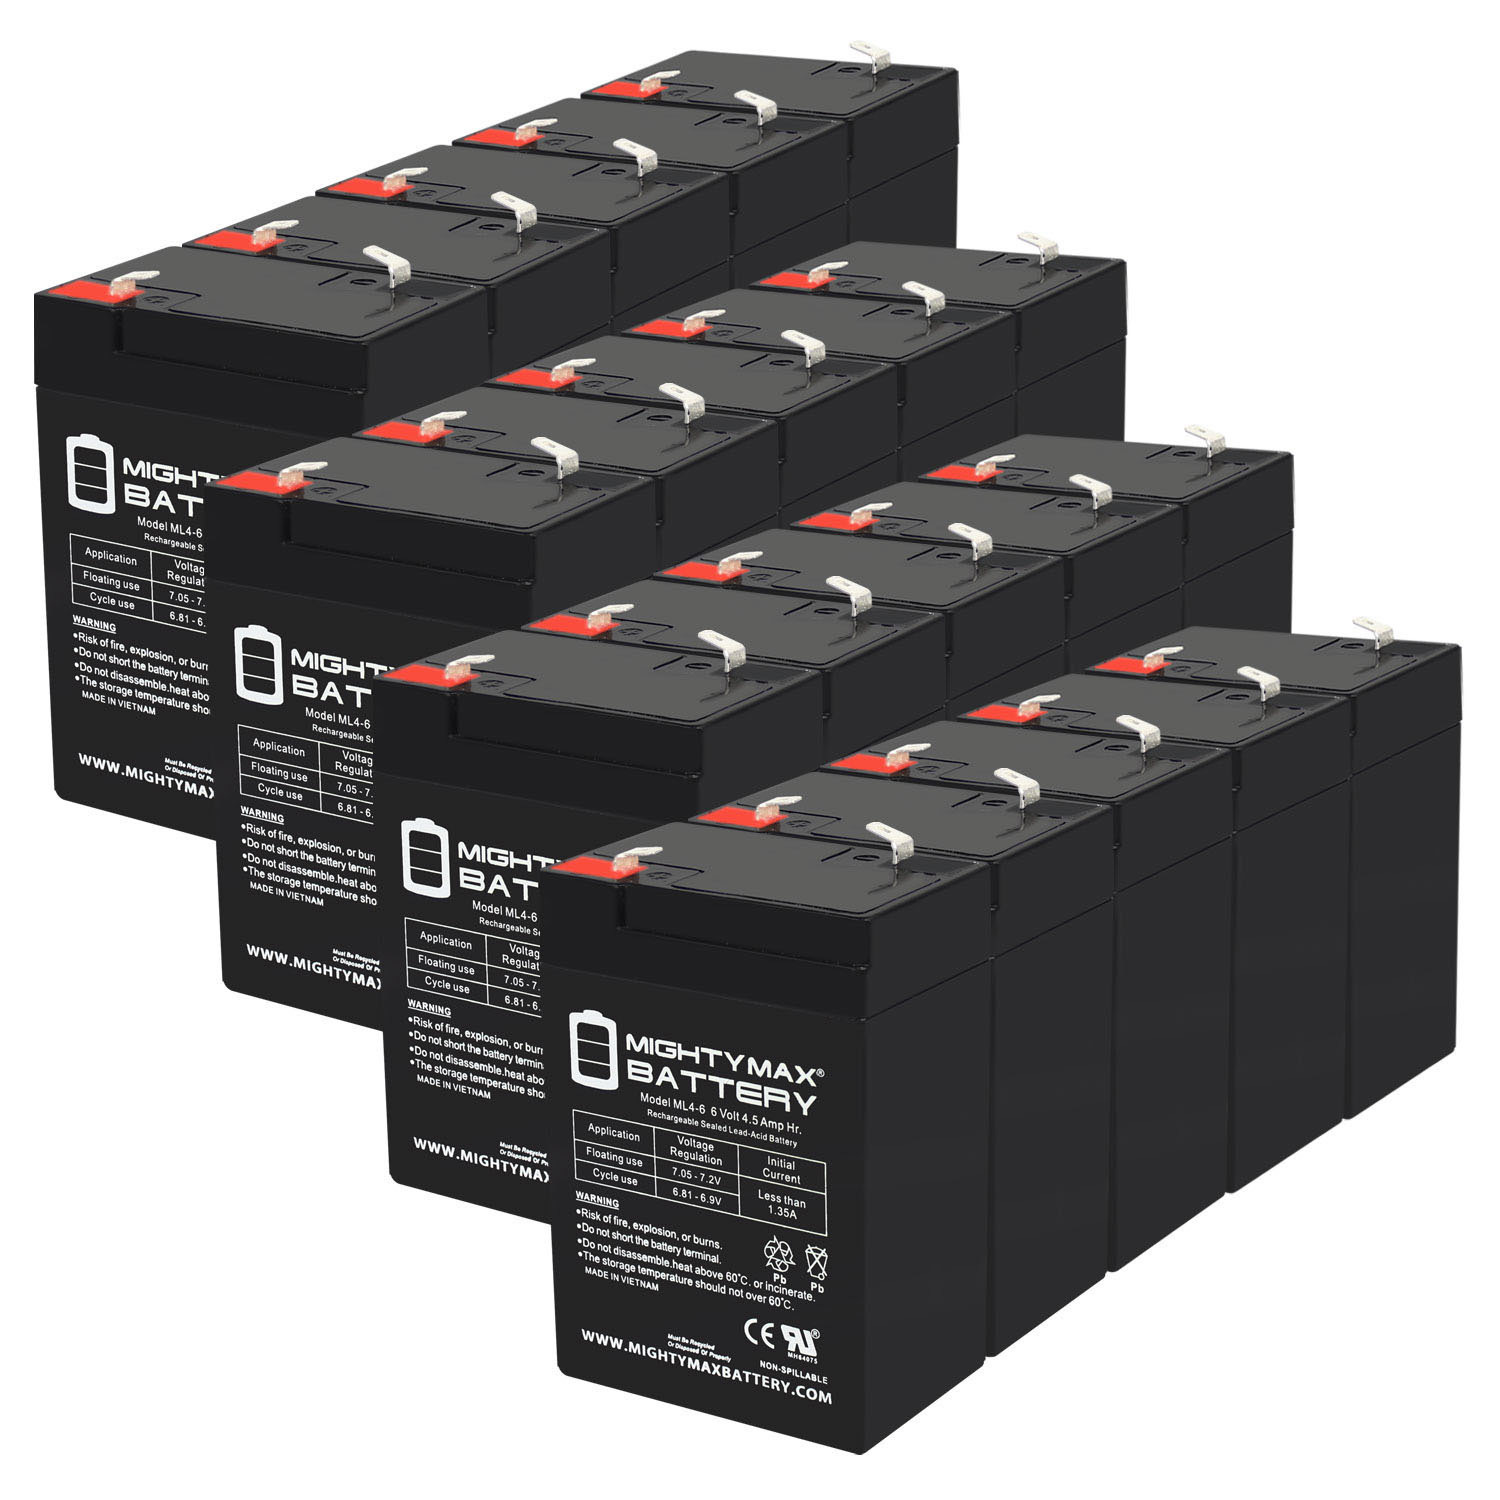 6V 4.5AH Replacement Battery for Parasystems PS-640 - 20 Pack